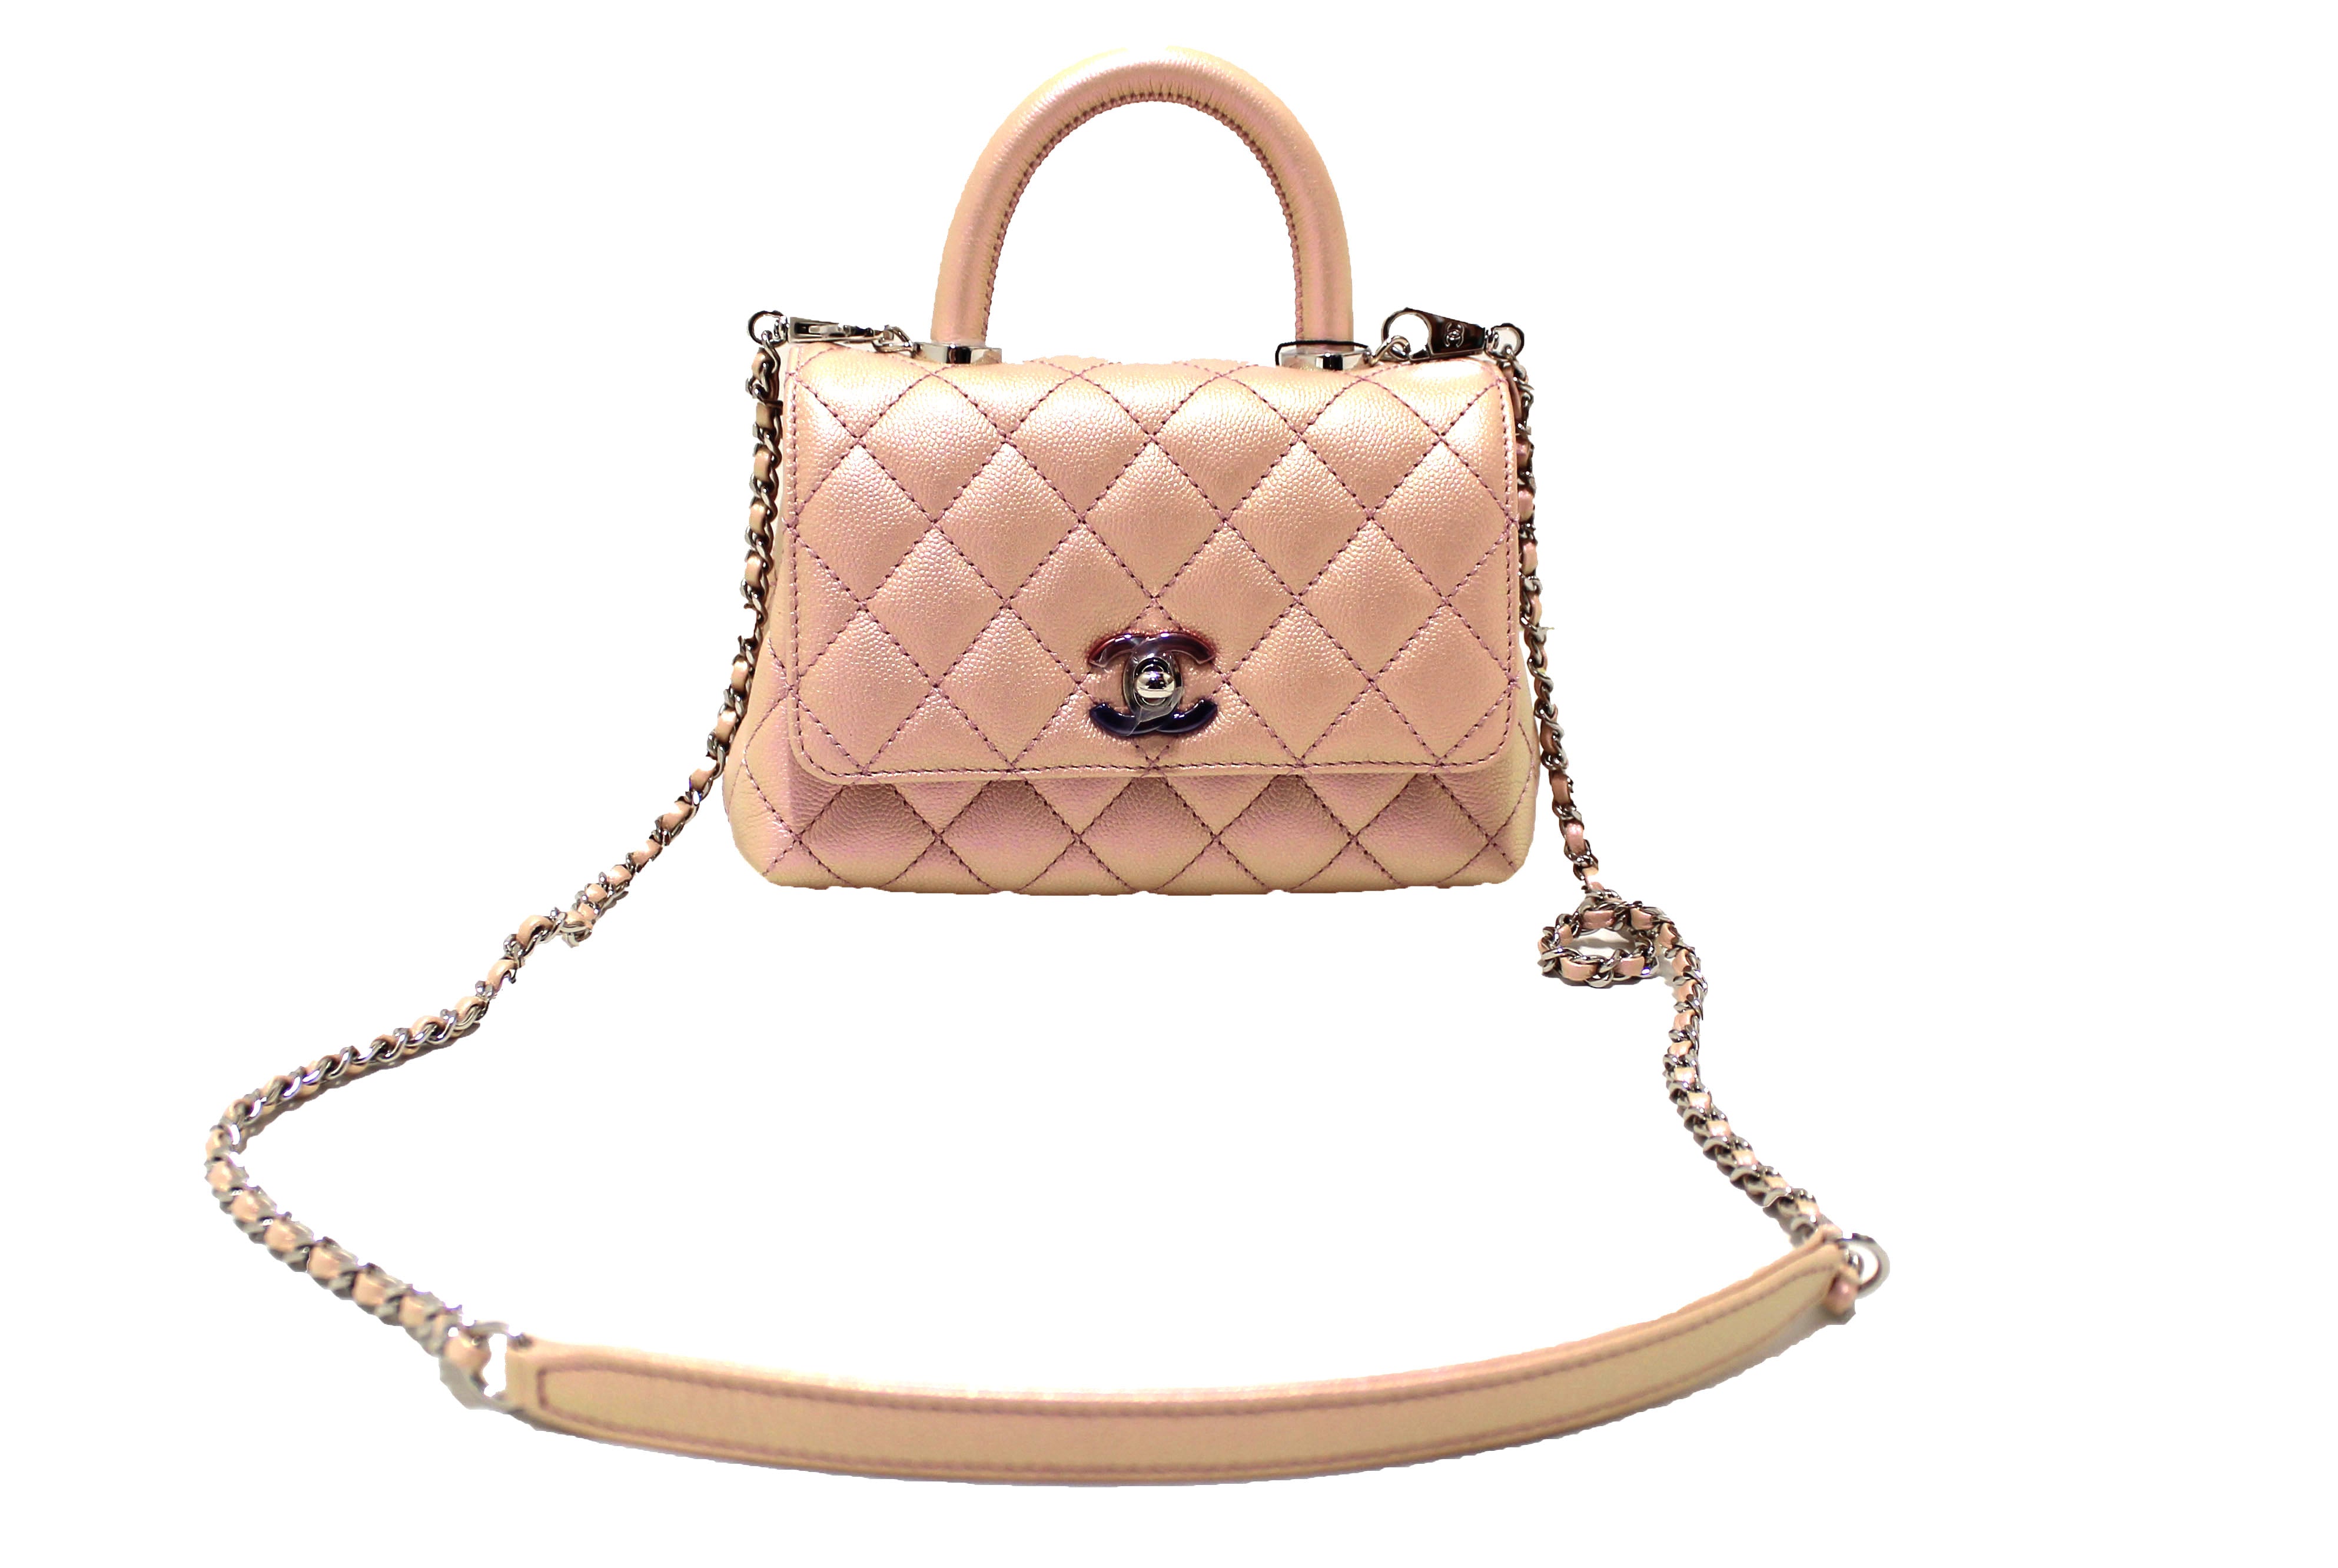 CHANEL, Bags, Chanel Mini Rectangular Flap Bag With Top Handle